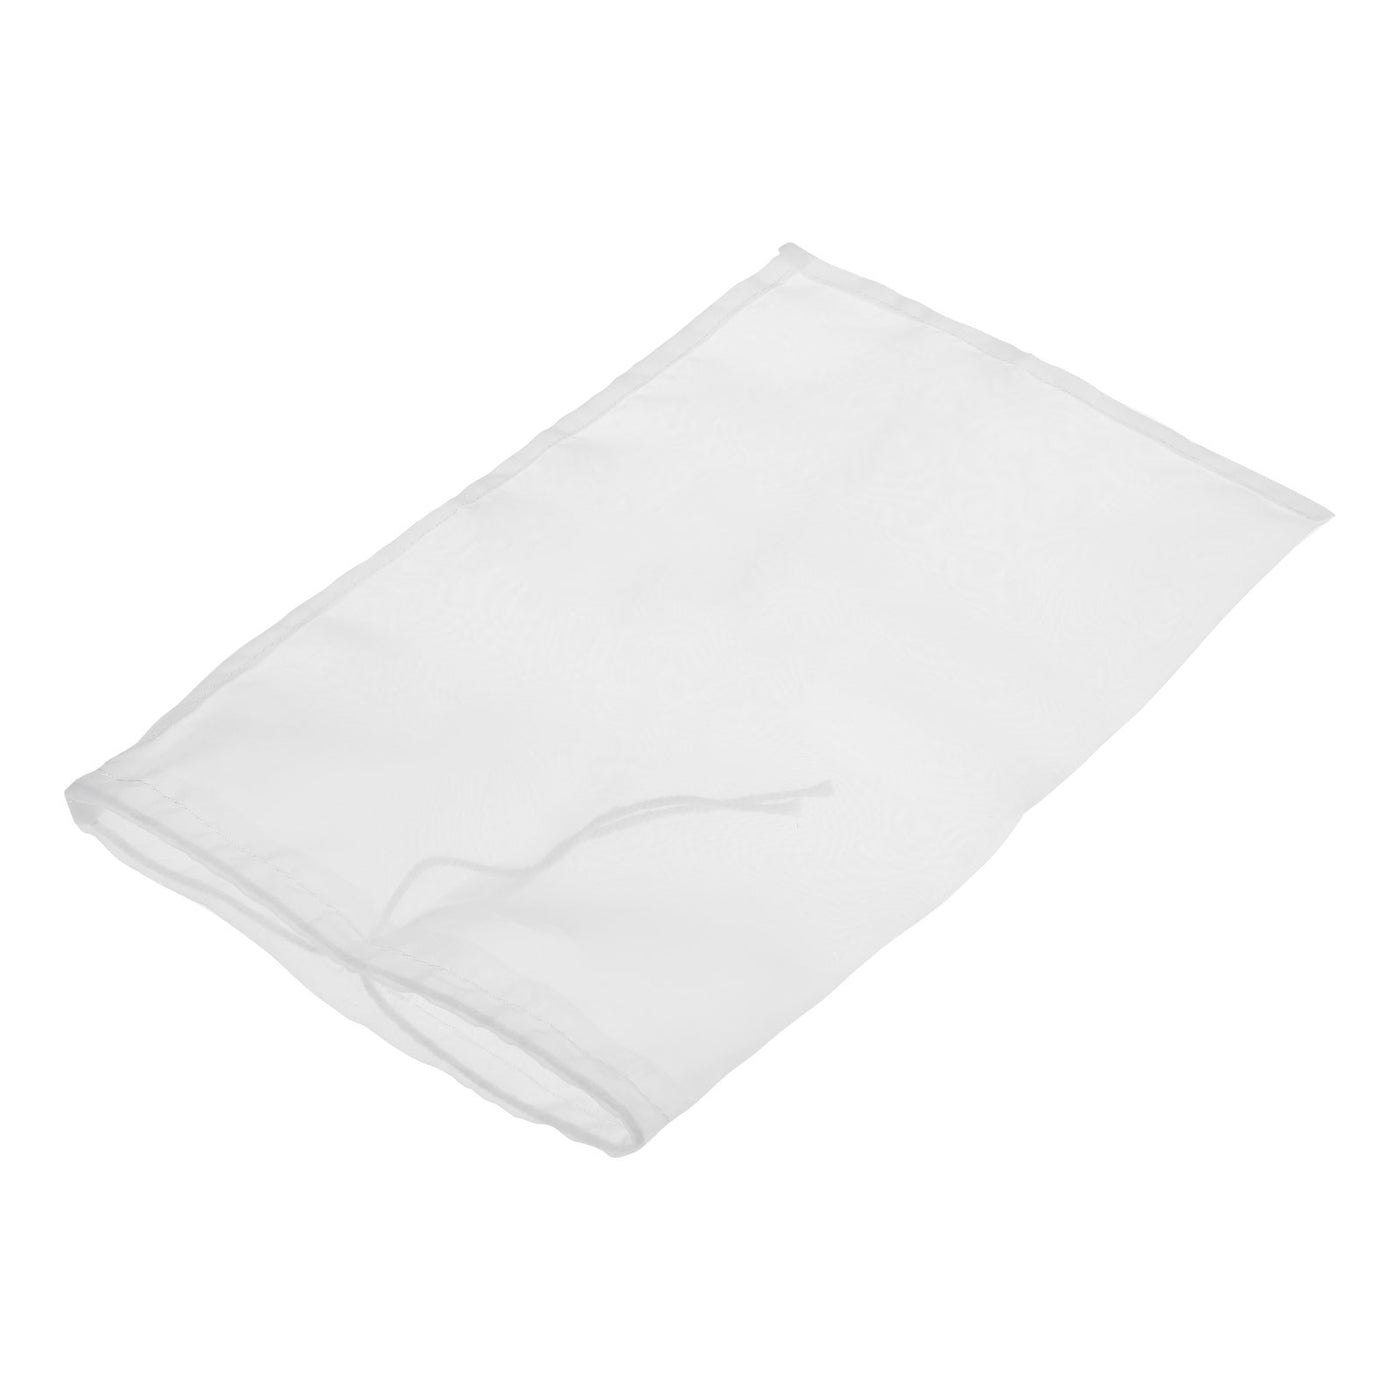 uxcell Uxcell Paint Filter Bag 150 Mesh (11.8"x7.9") Nylon Strainer for Filtering Paint